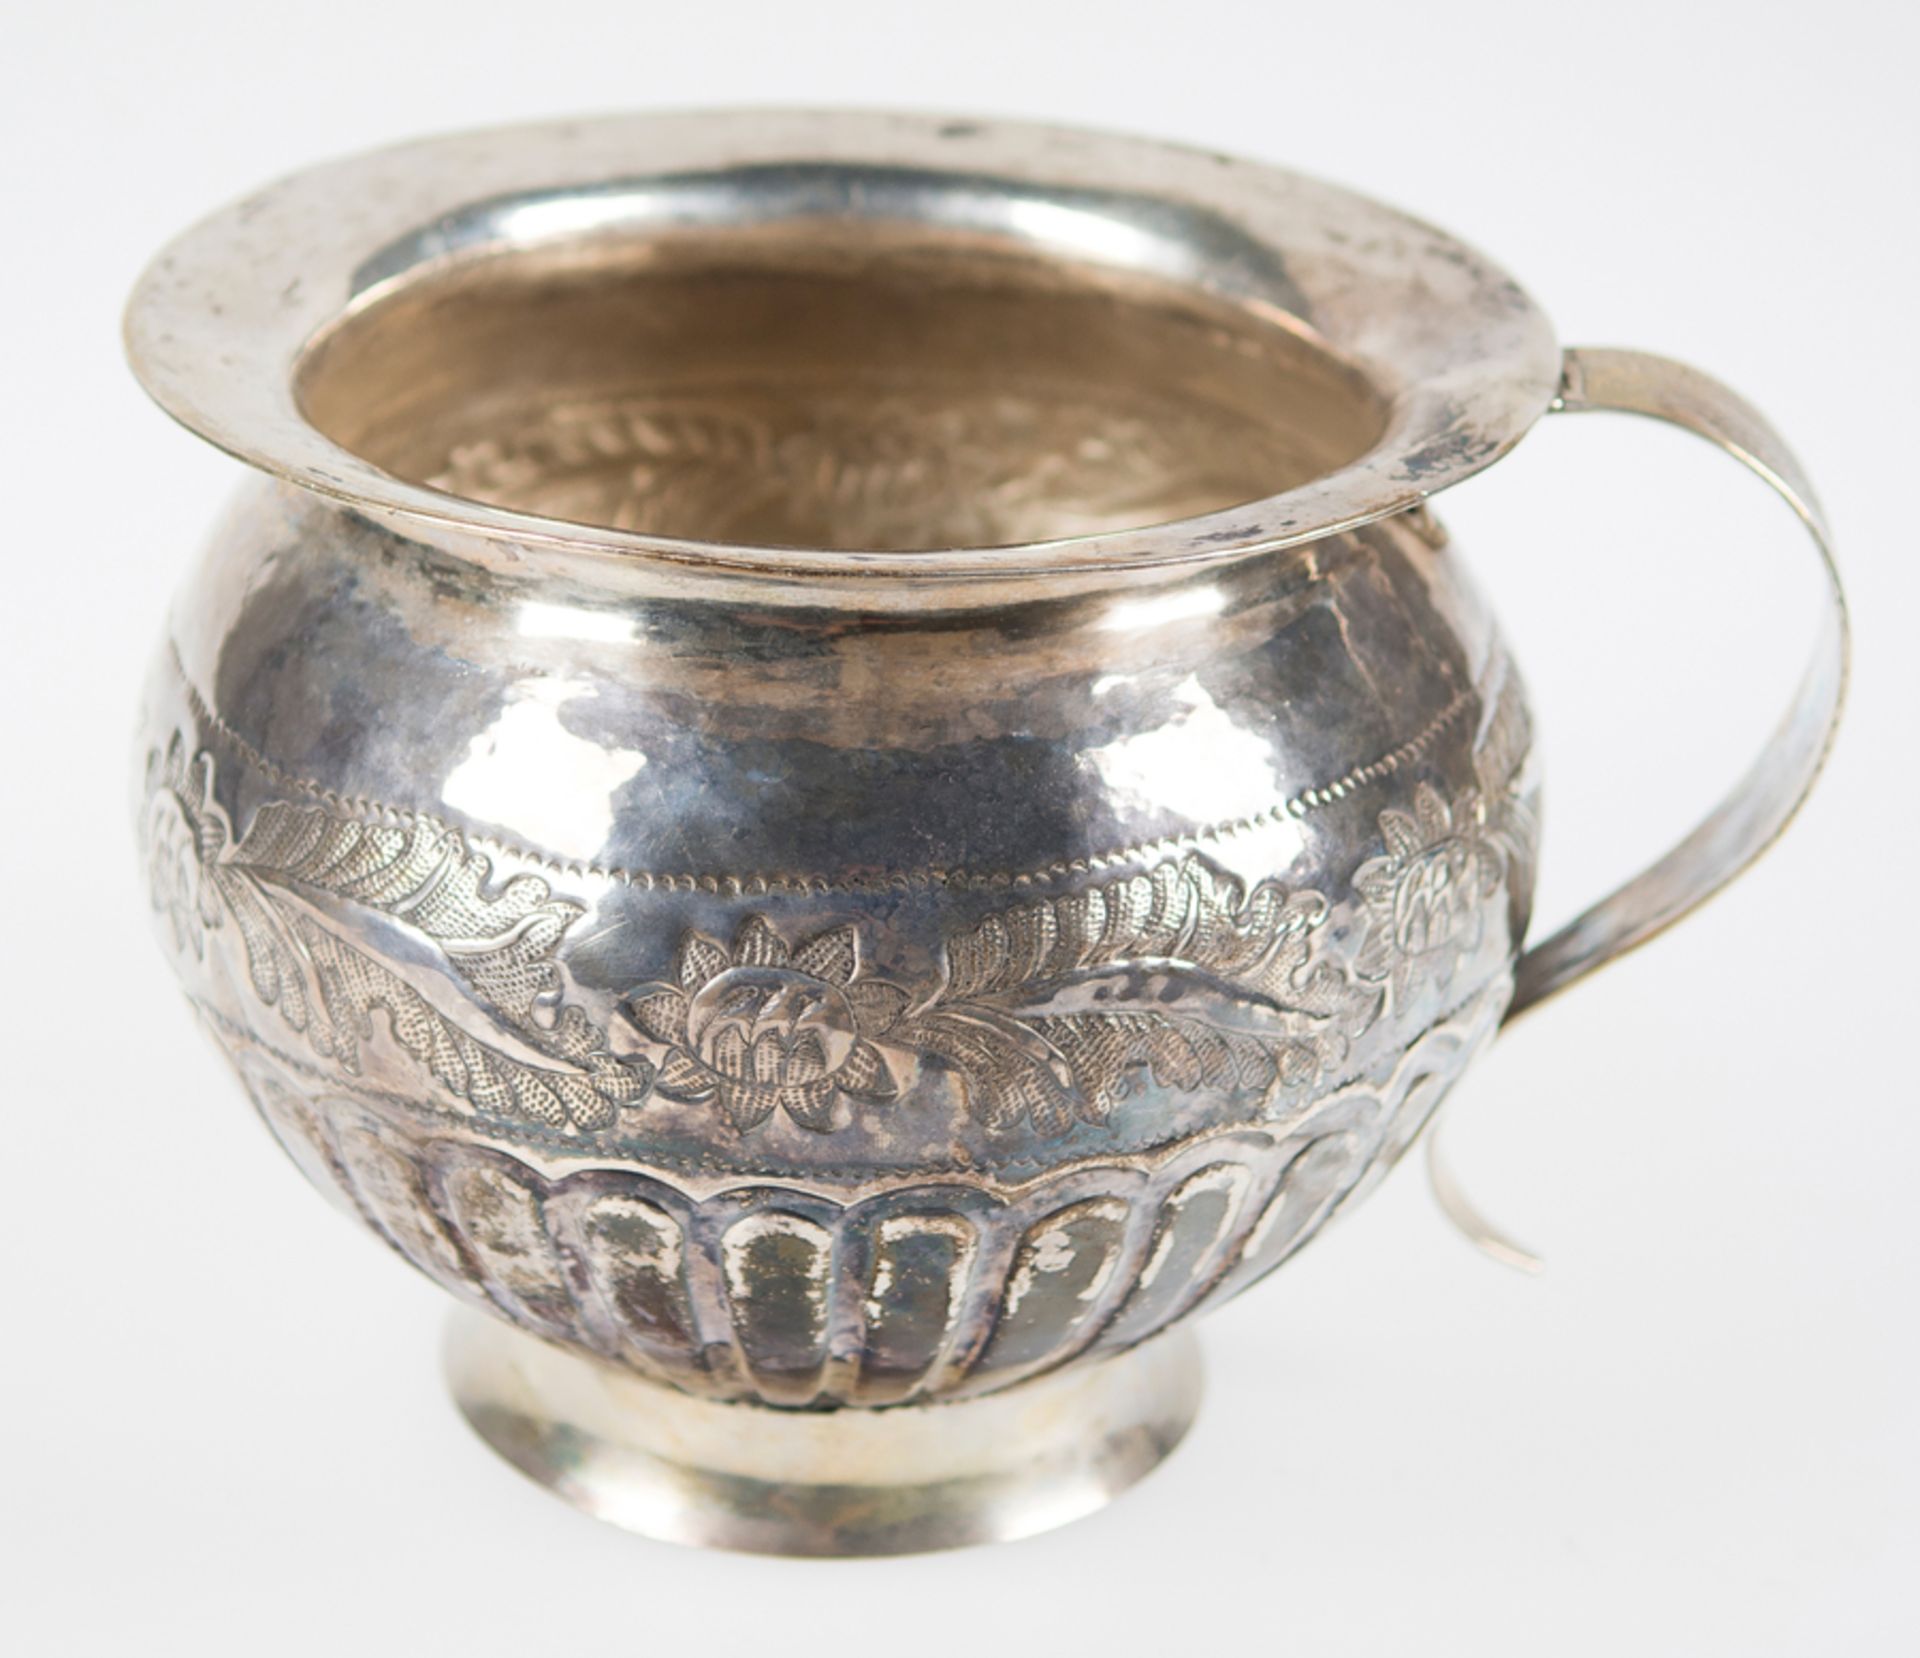 Embossed silver spittoon. Novohispanic or Viceregal work. Mexico or Peru. Late 18th century. - Image 2 of 6